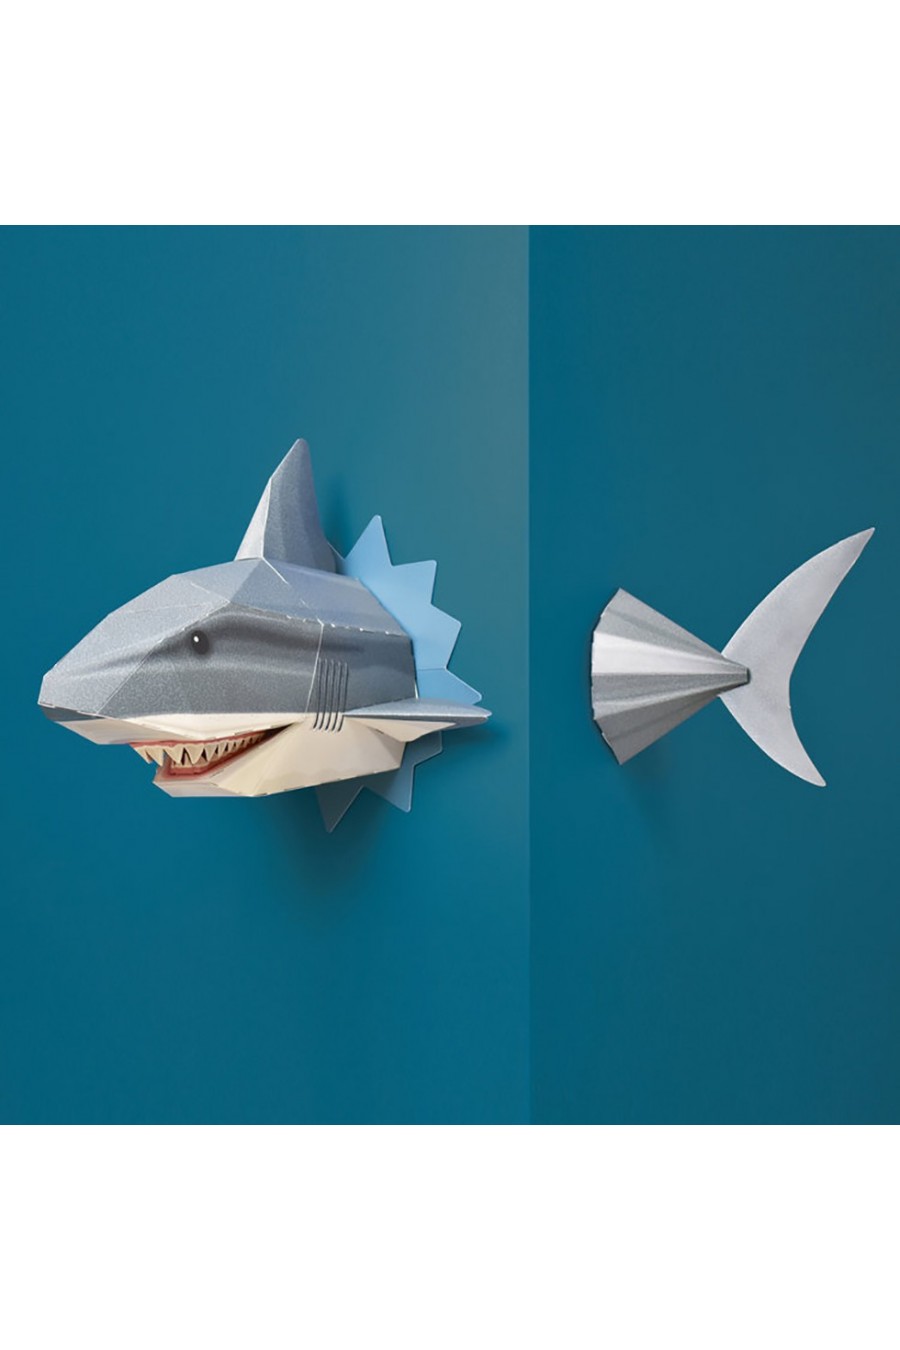 Details about   Bull Shark Buisness Shark With Suitcase And Tie Pinback Button 1.25 Inches 